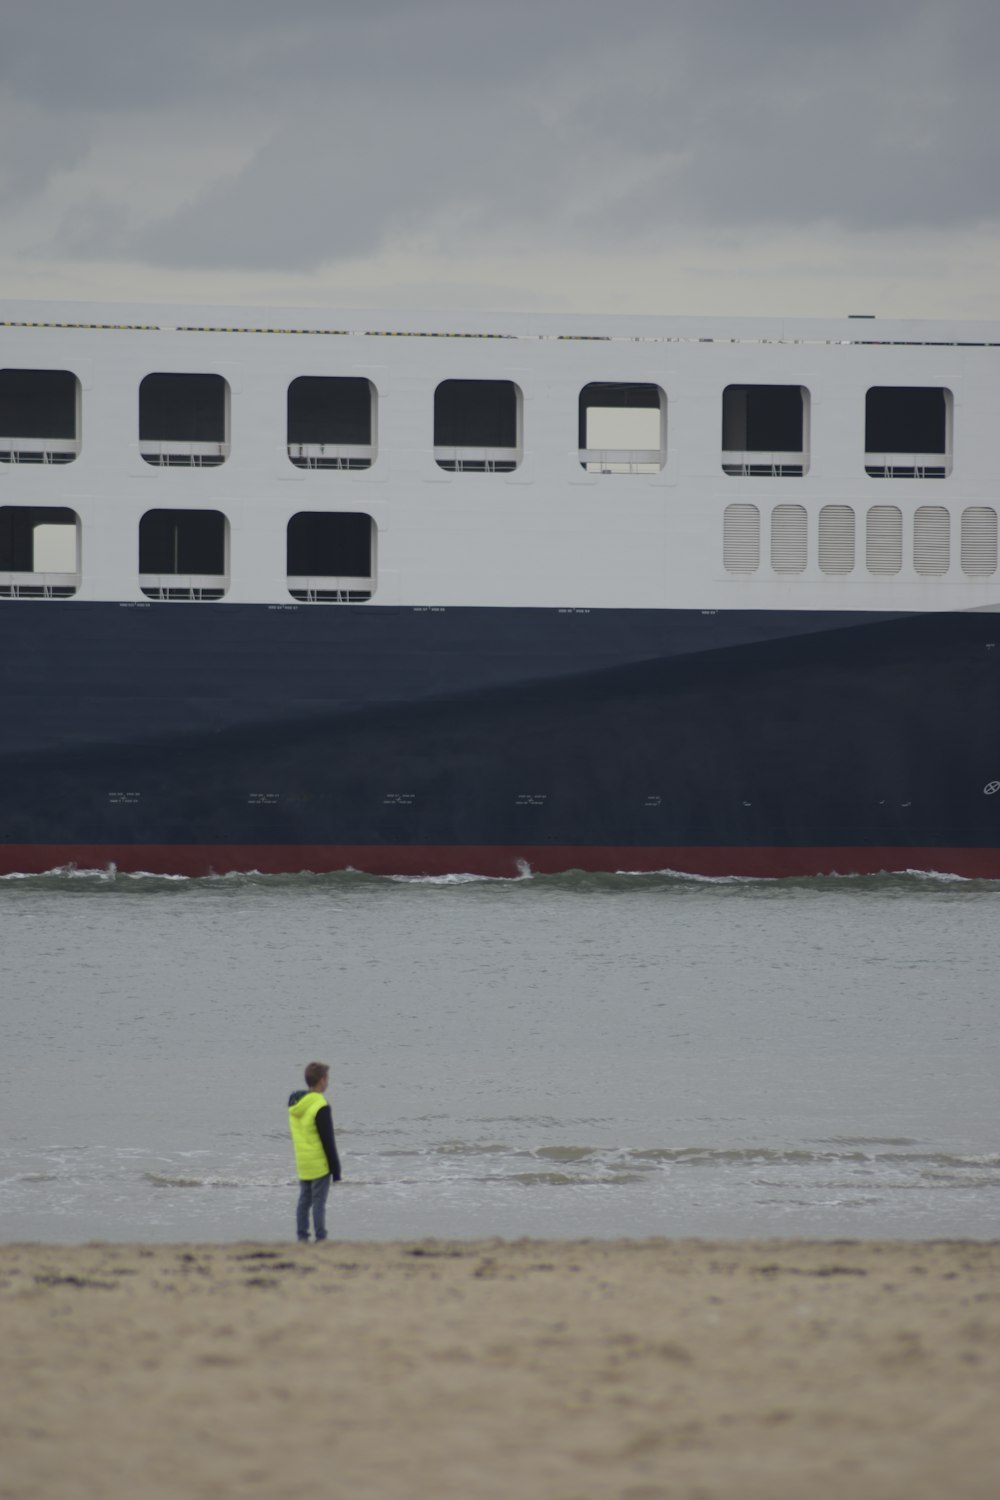 a man standing on a beach next to a large ship